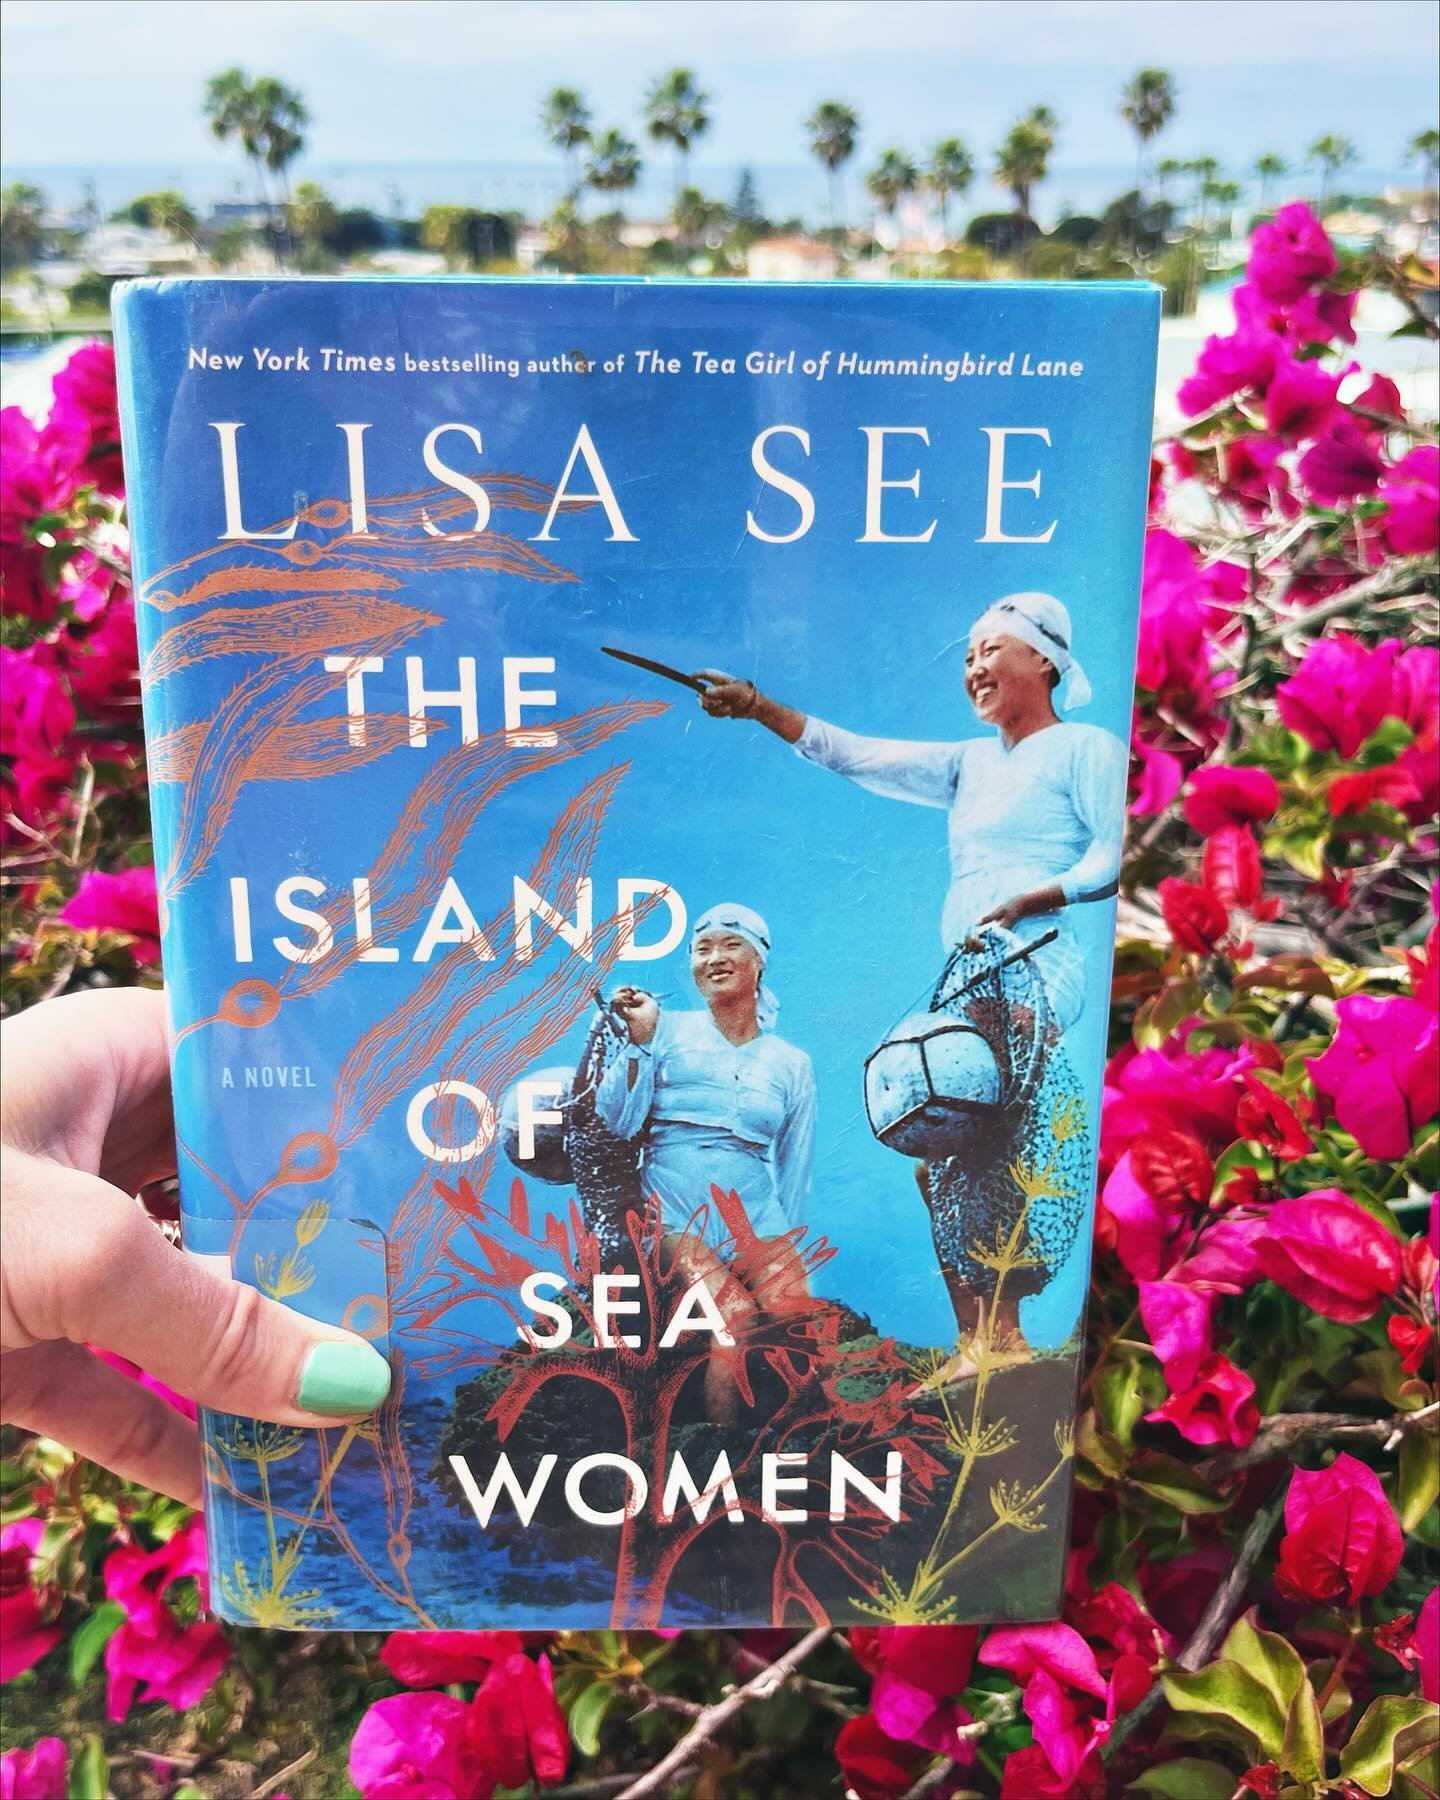 Recent Read: THE ISLAND OF SEA WOMEN by Lisa See 
Genre: historical fiction
Age Category: adult (mature content)
✨
Catching up and sharing a book club pick I read in February. This book was very interesting and despite it being a hard one for me cont